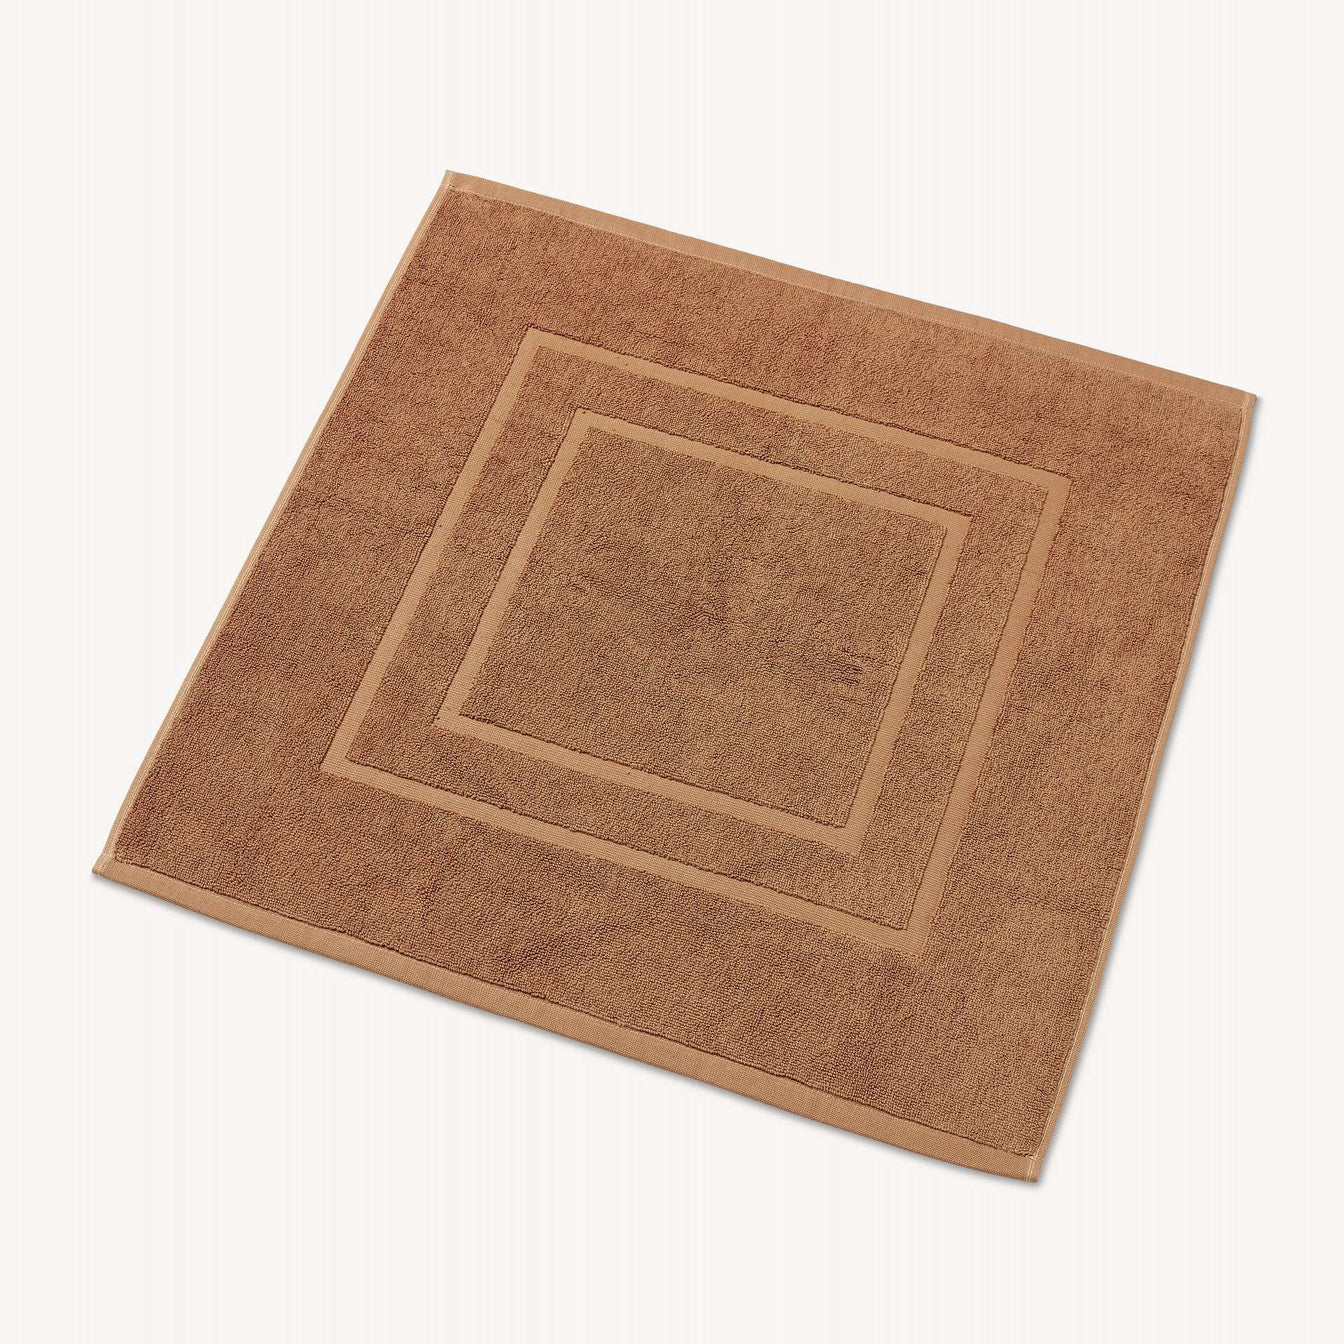 Terracotta-product_image